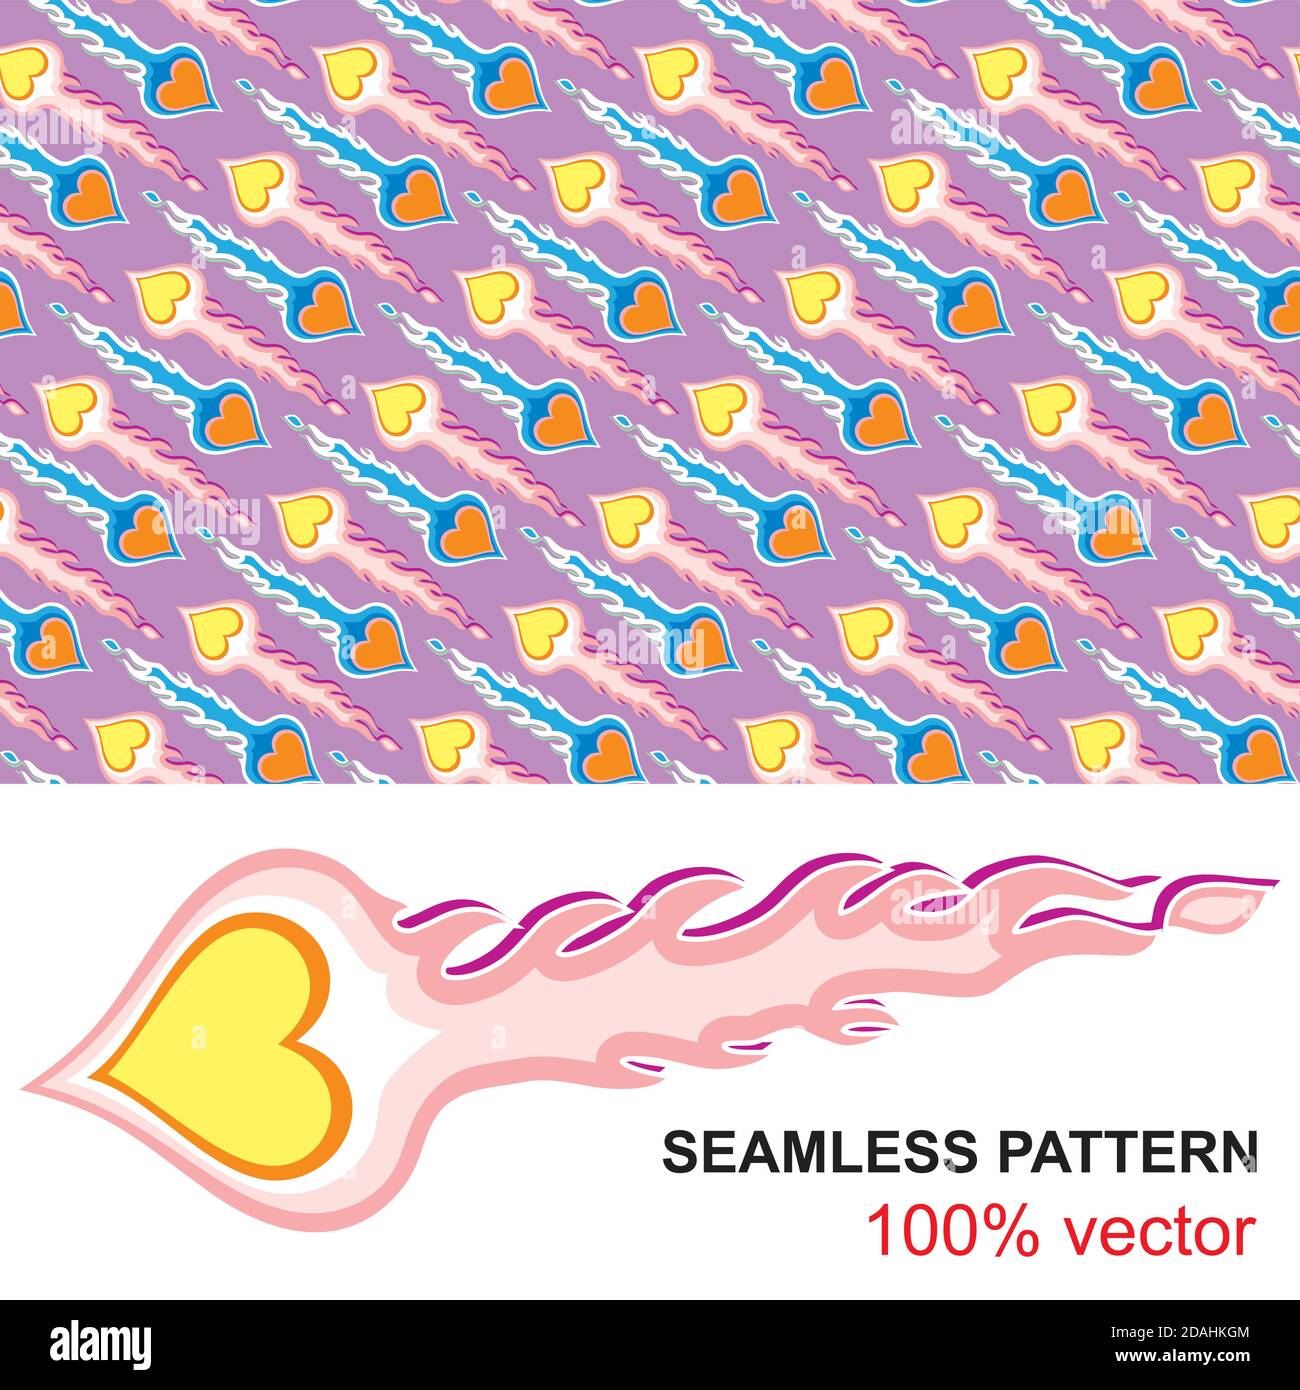 Burning Heart. Blazing heart. Seamless pattern with flaming hearts in the style of car stickers for design of gift packs, patterns fabric, wallpaper, Stock Vector